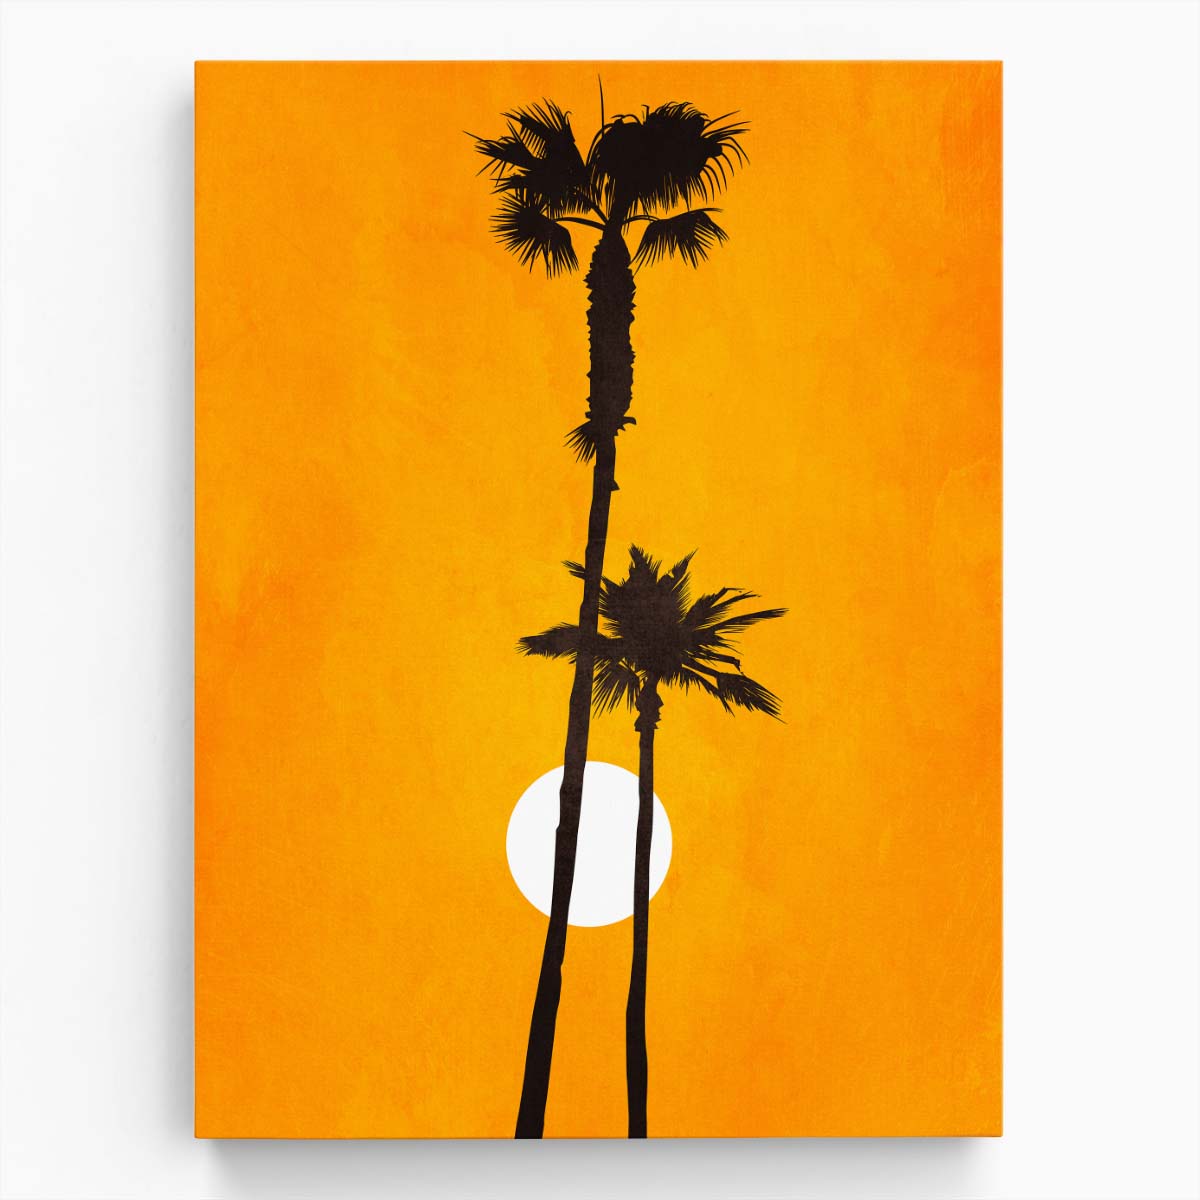 Tropical Sunset Palm Tree Illustration Wall Art by Kubistika by Luxuriance Designs, made in USA